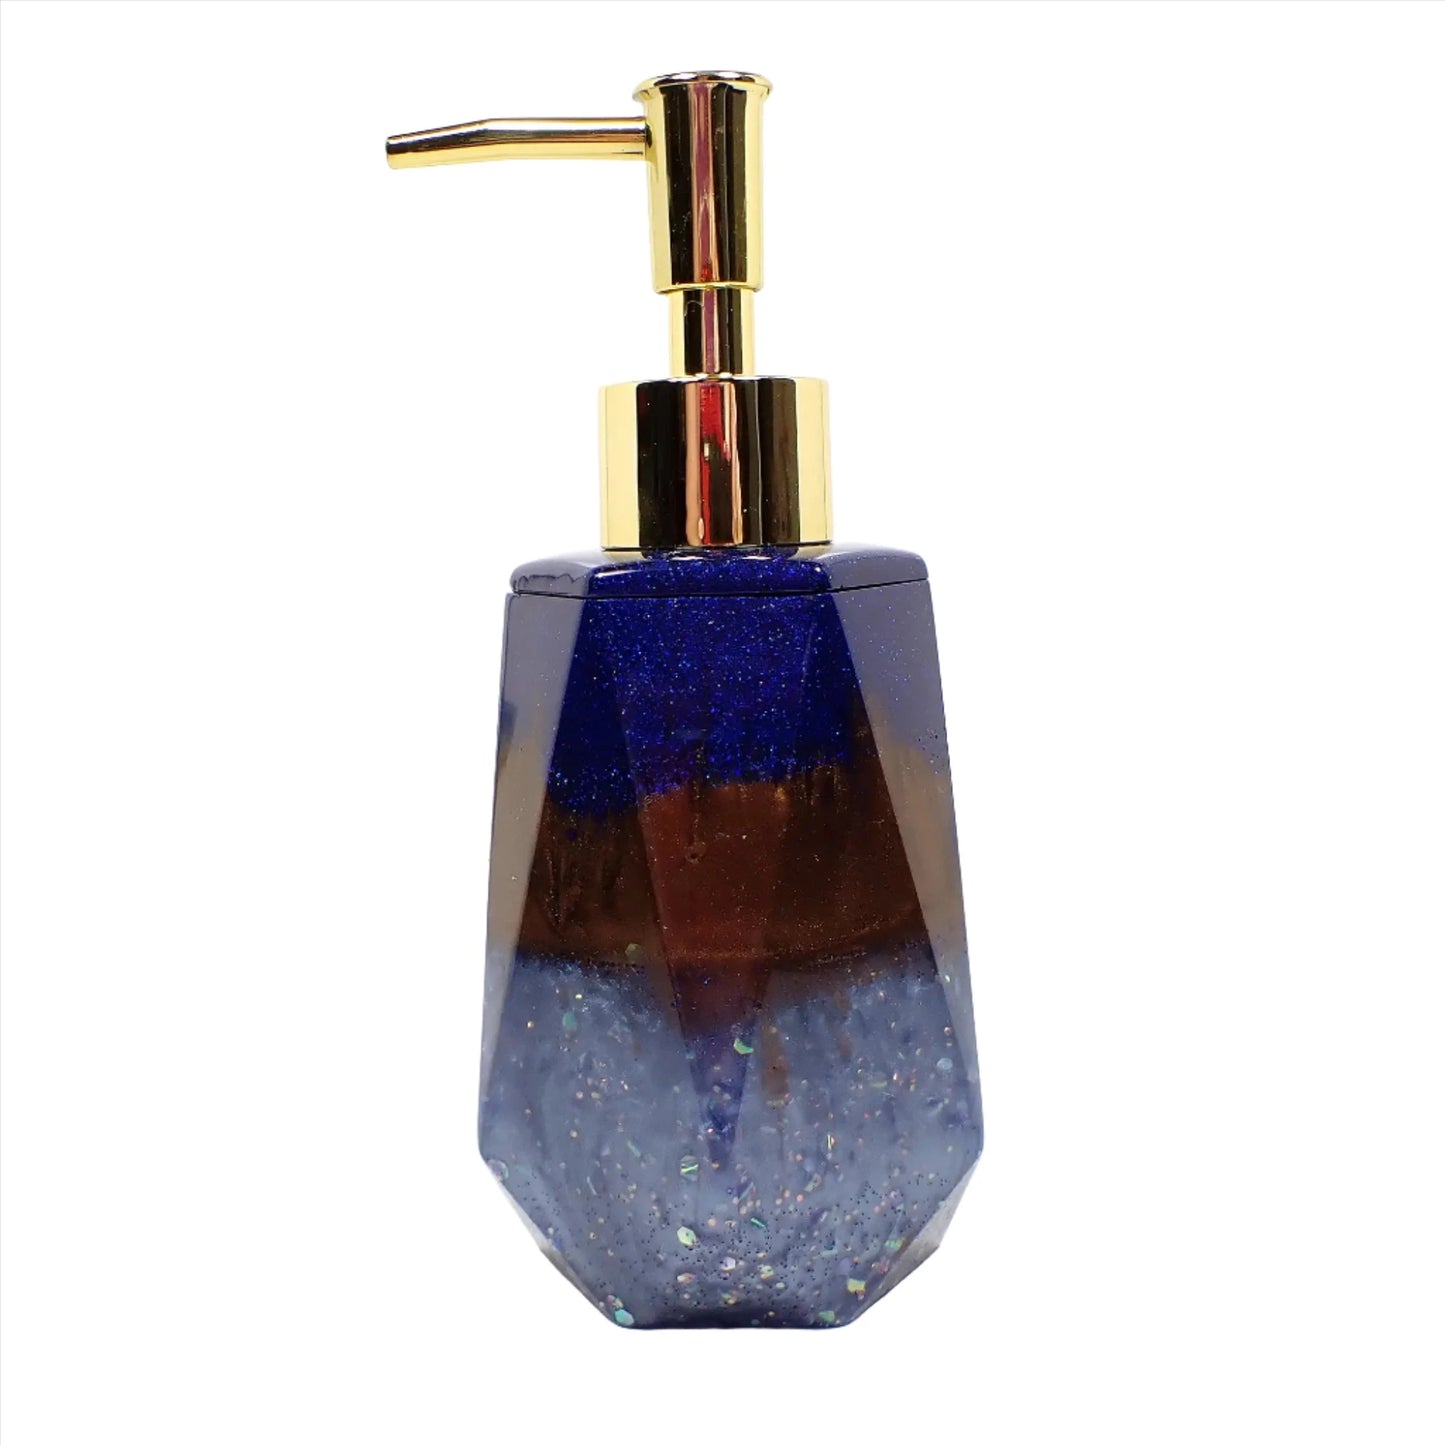 Side view of the handmade resin soap dispenser. In this photo it has a gold tone color pump on it. The top part of the dispenser has pearly dark blue resin with tiny flecks of blue glitter. The middle of the dispenser has pearly brown resin and the bottom has pearly light blue resin with chunky iridescent glitter. It has a faceted shape that is narrower at the top and flared at the bottom.